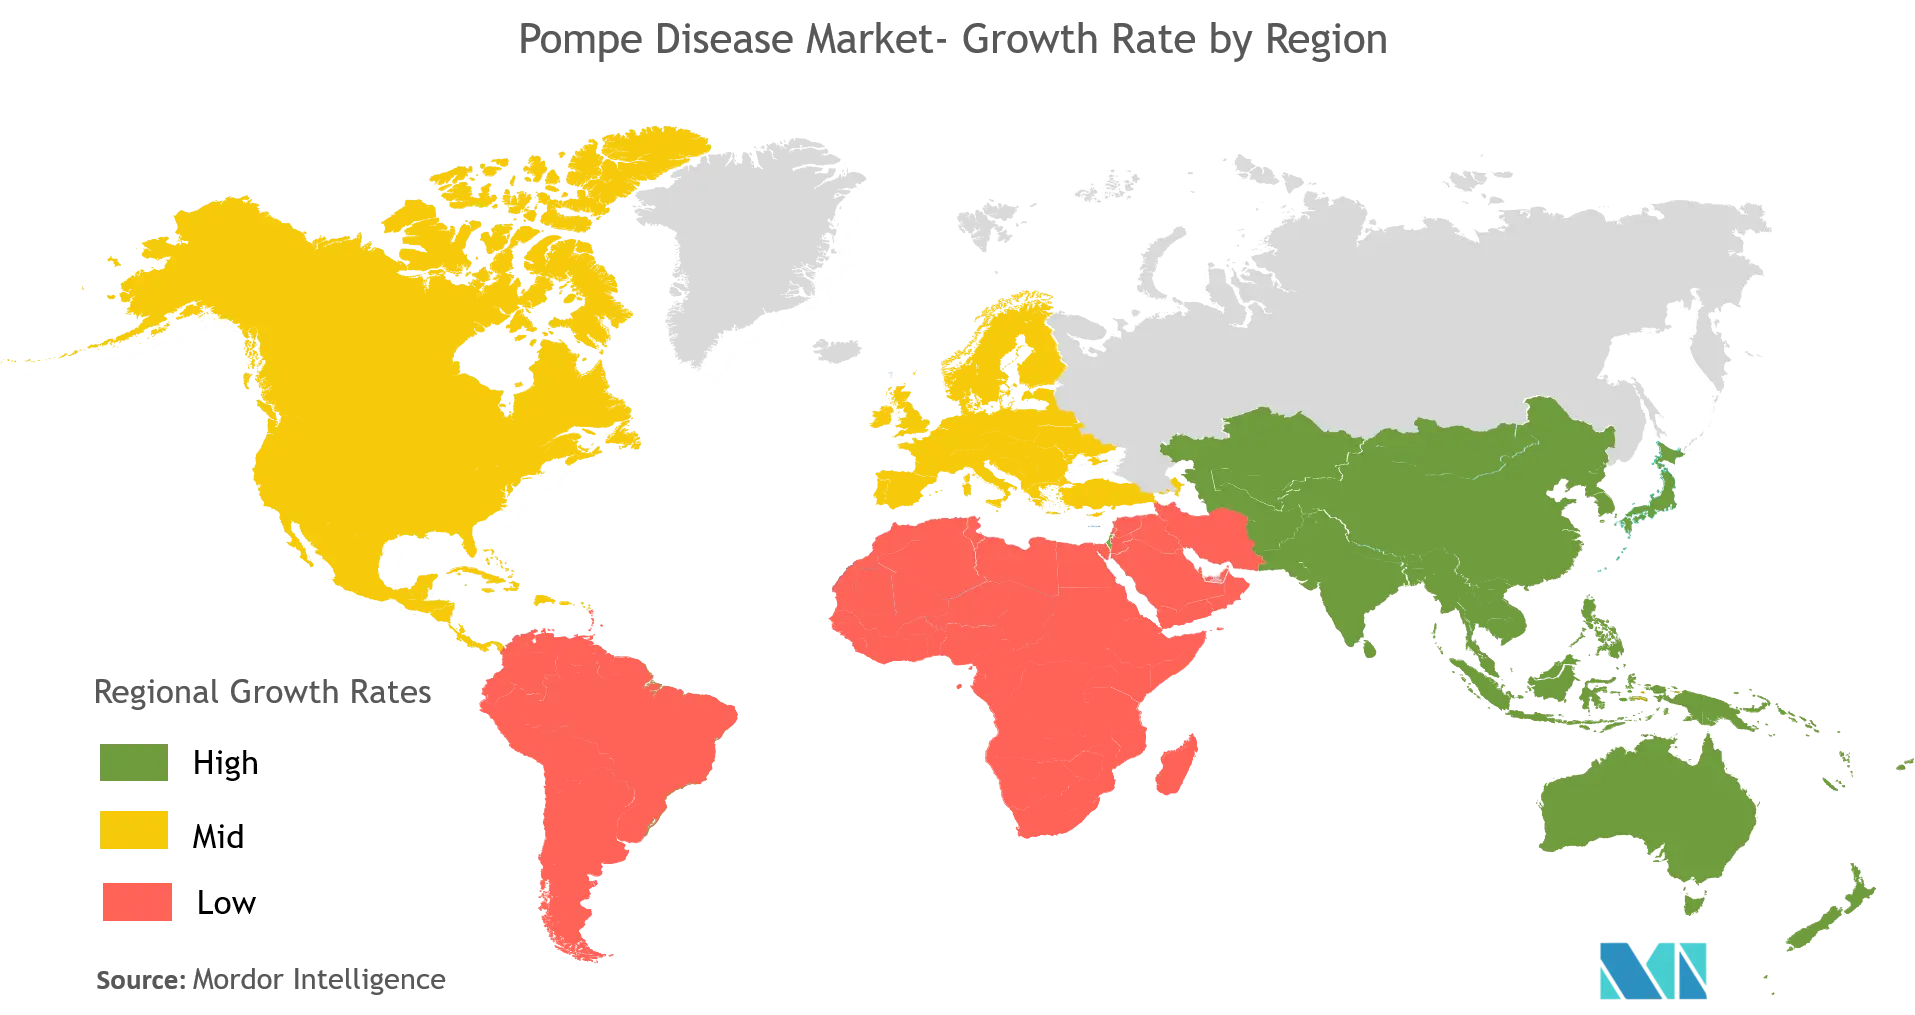 Pompe Diseases Market Growth Rate